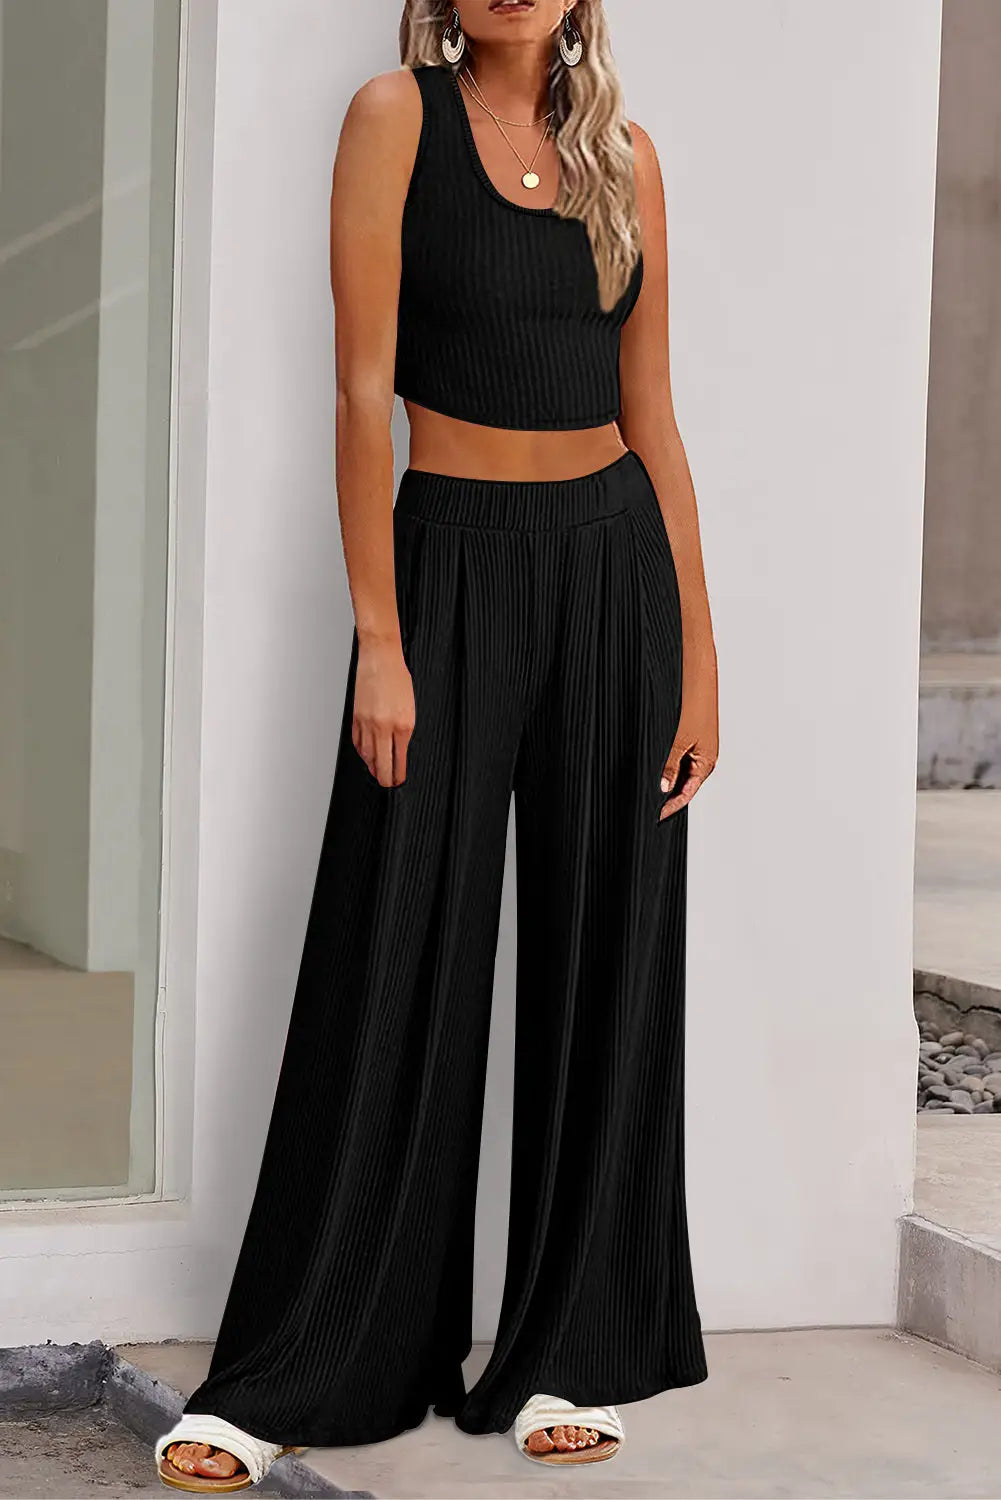 Textured crop top and wide leg pants outfit - black / s / 93% viscose + 7% elastane - two piece sets/pant sets